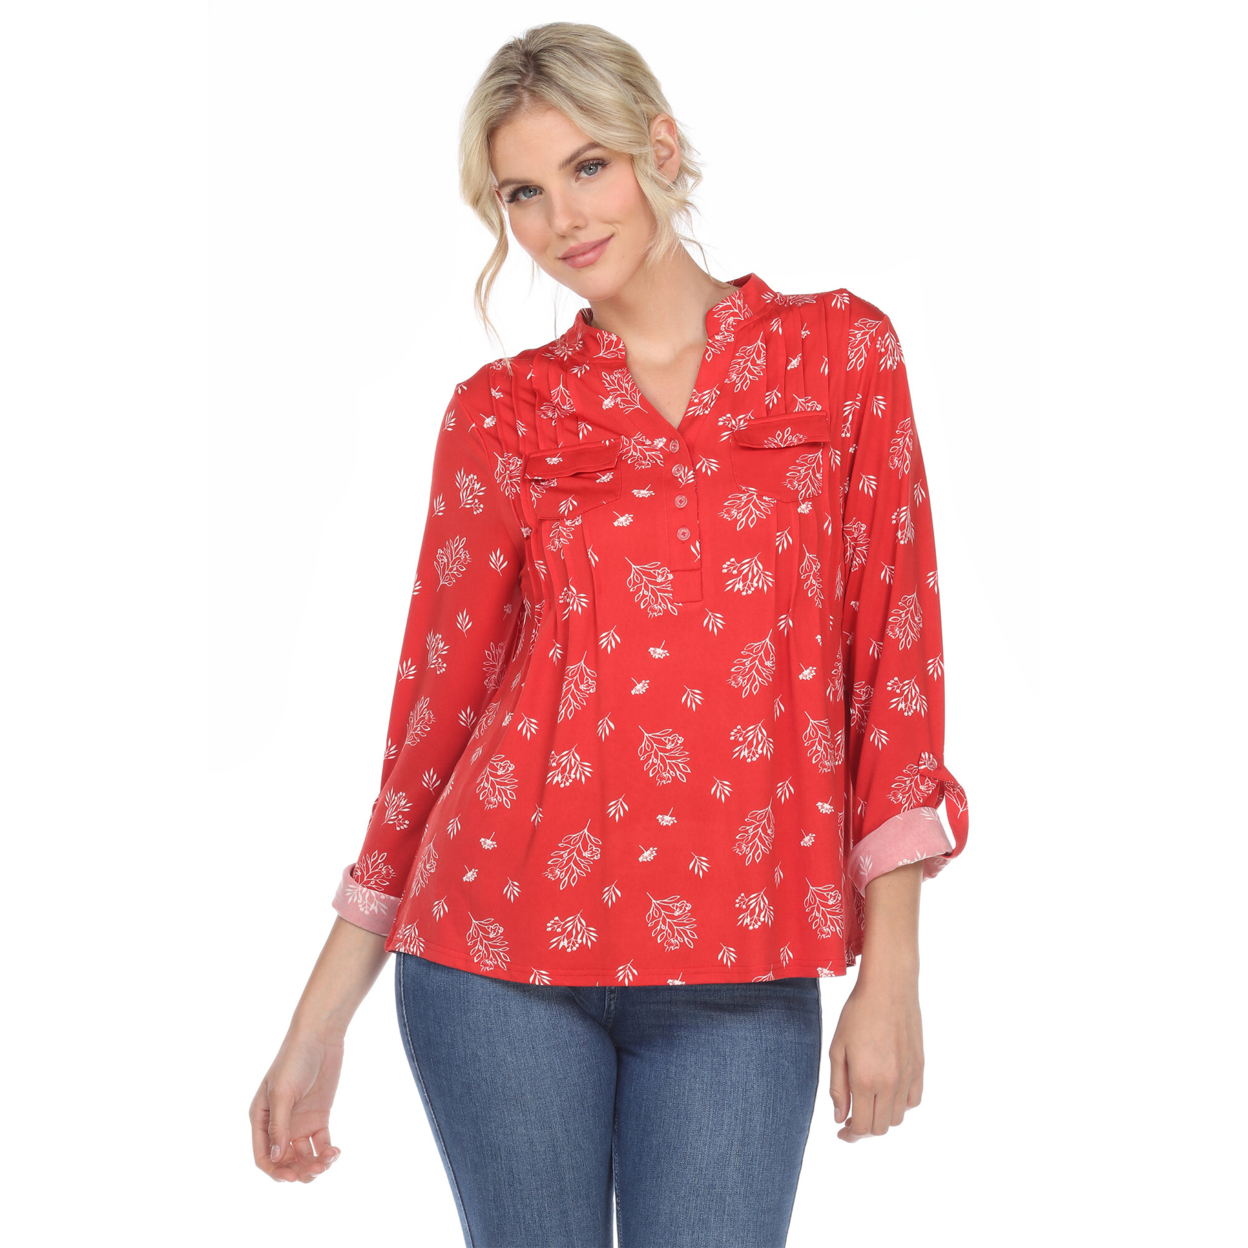 White Mark Women's Pleated Long Sleeve Leaf Print Blouse - Red, Small